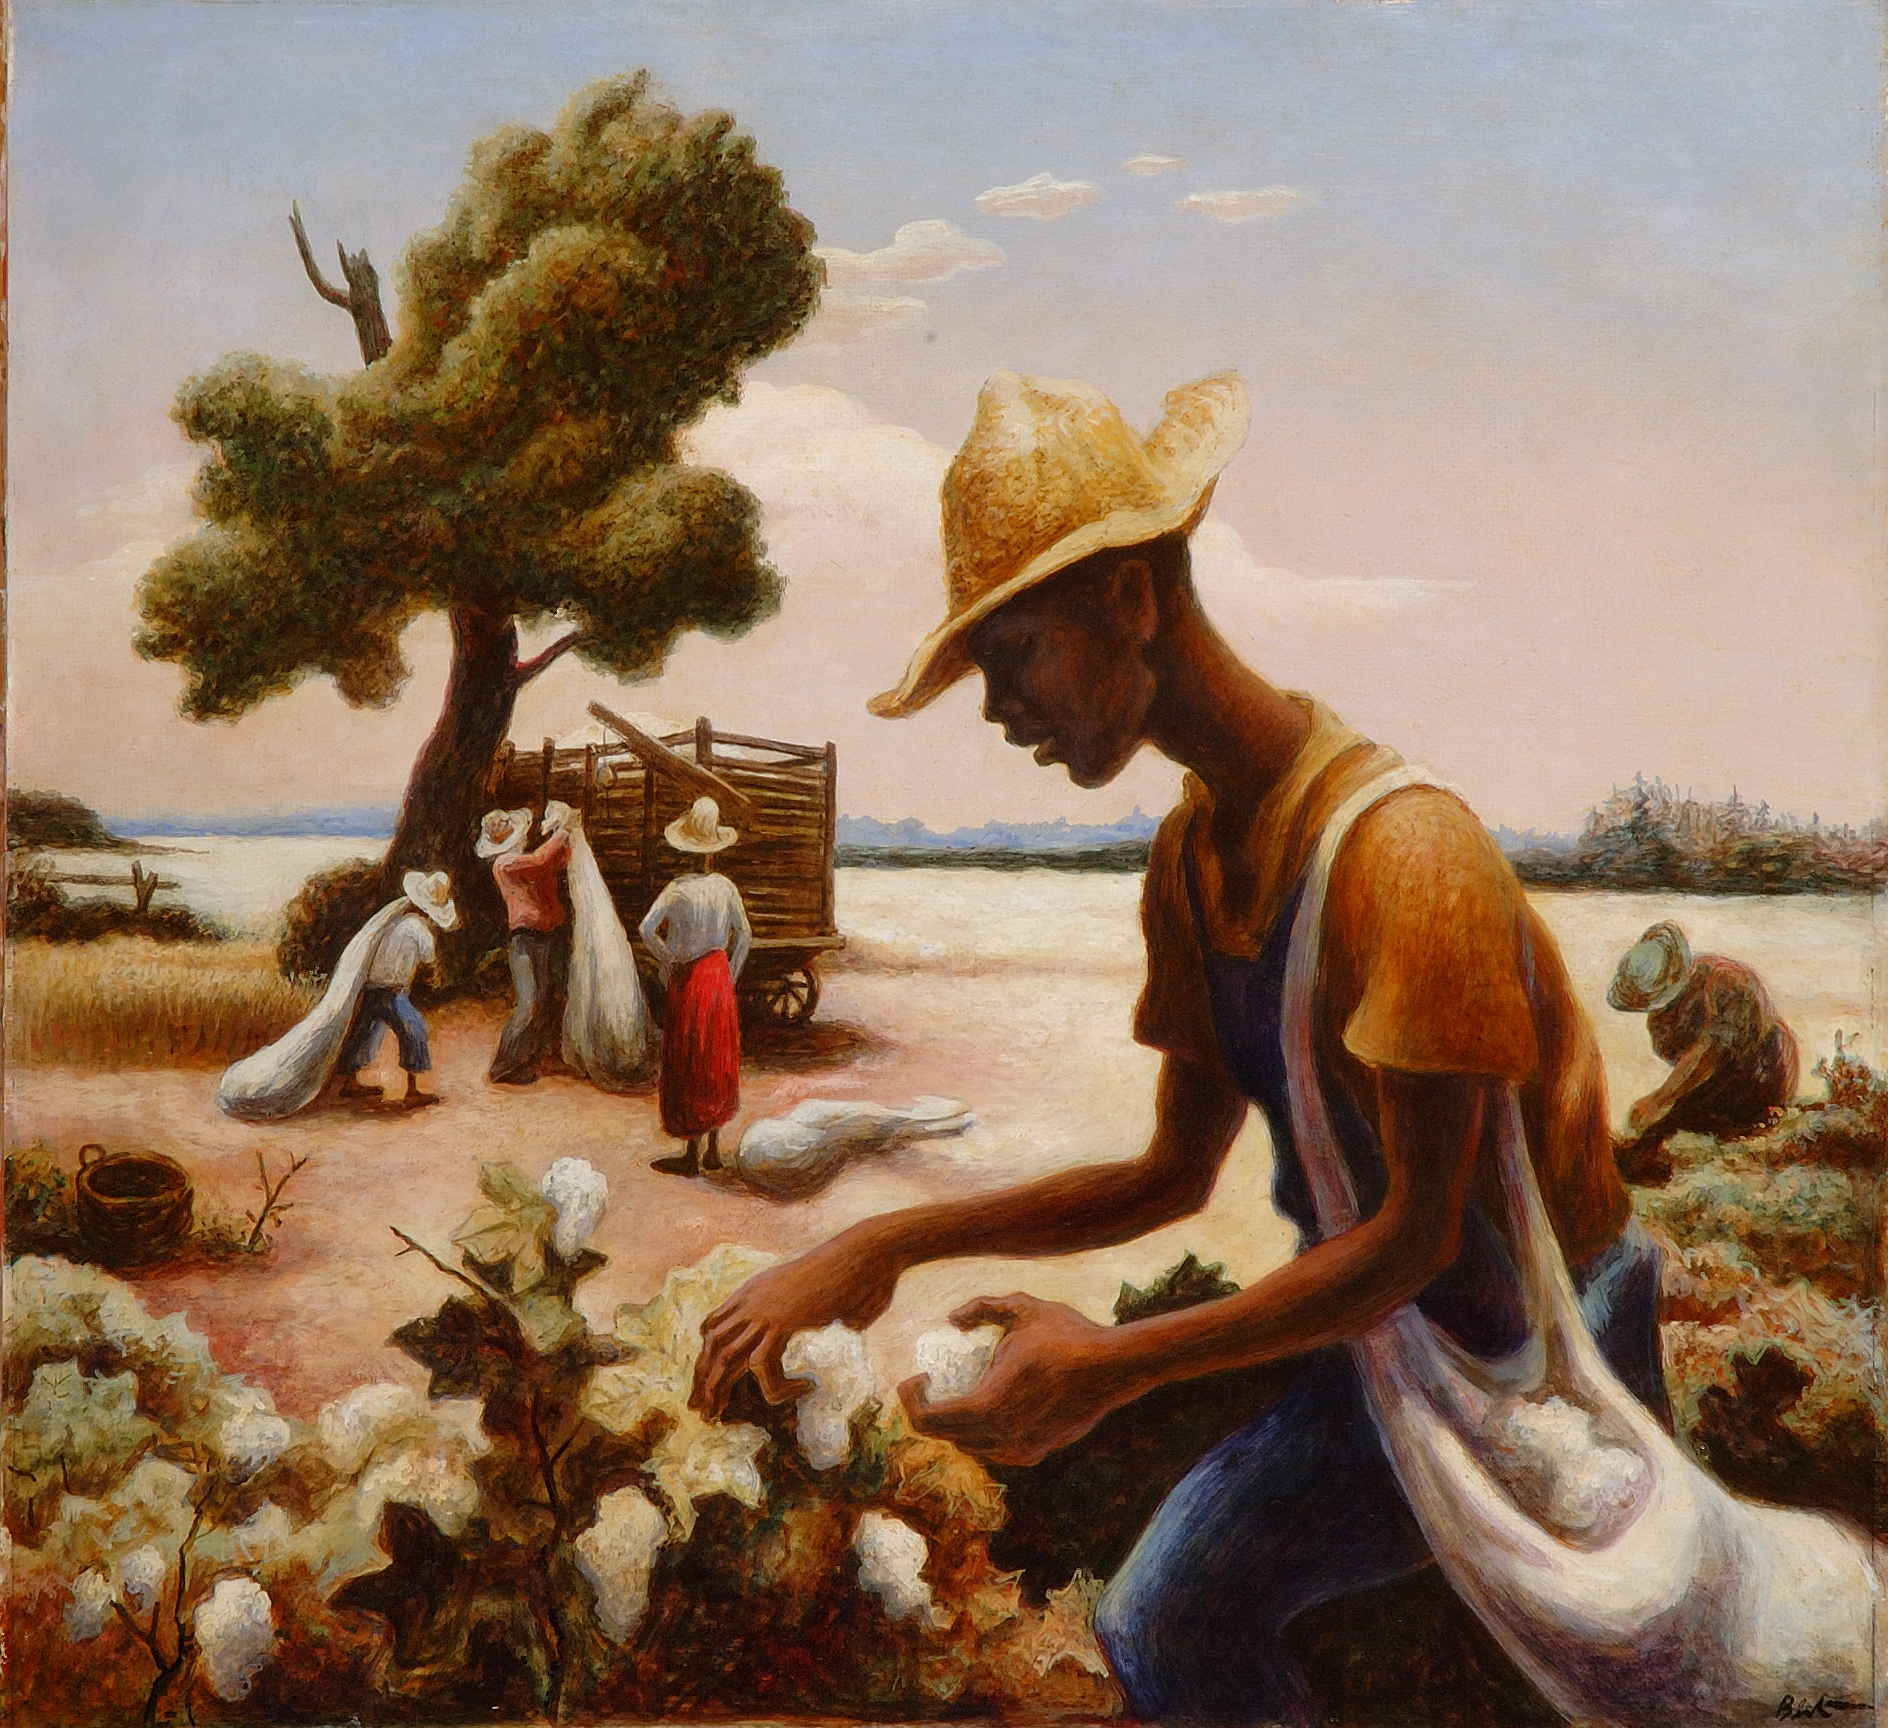 Painting of cotton pickers working in a field.